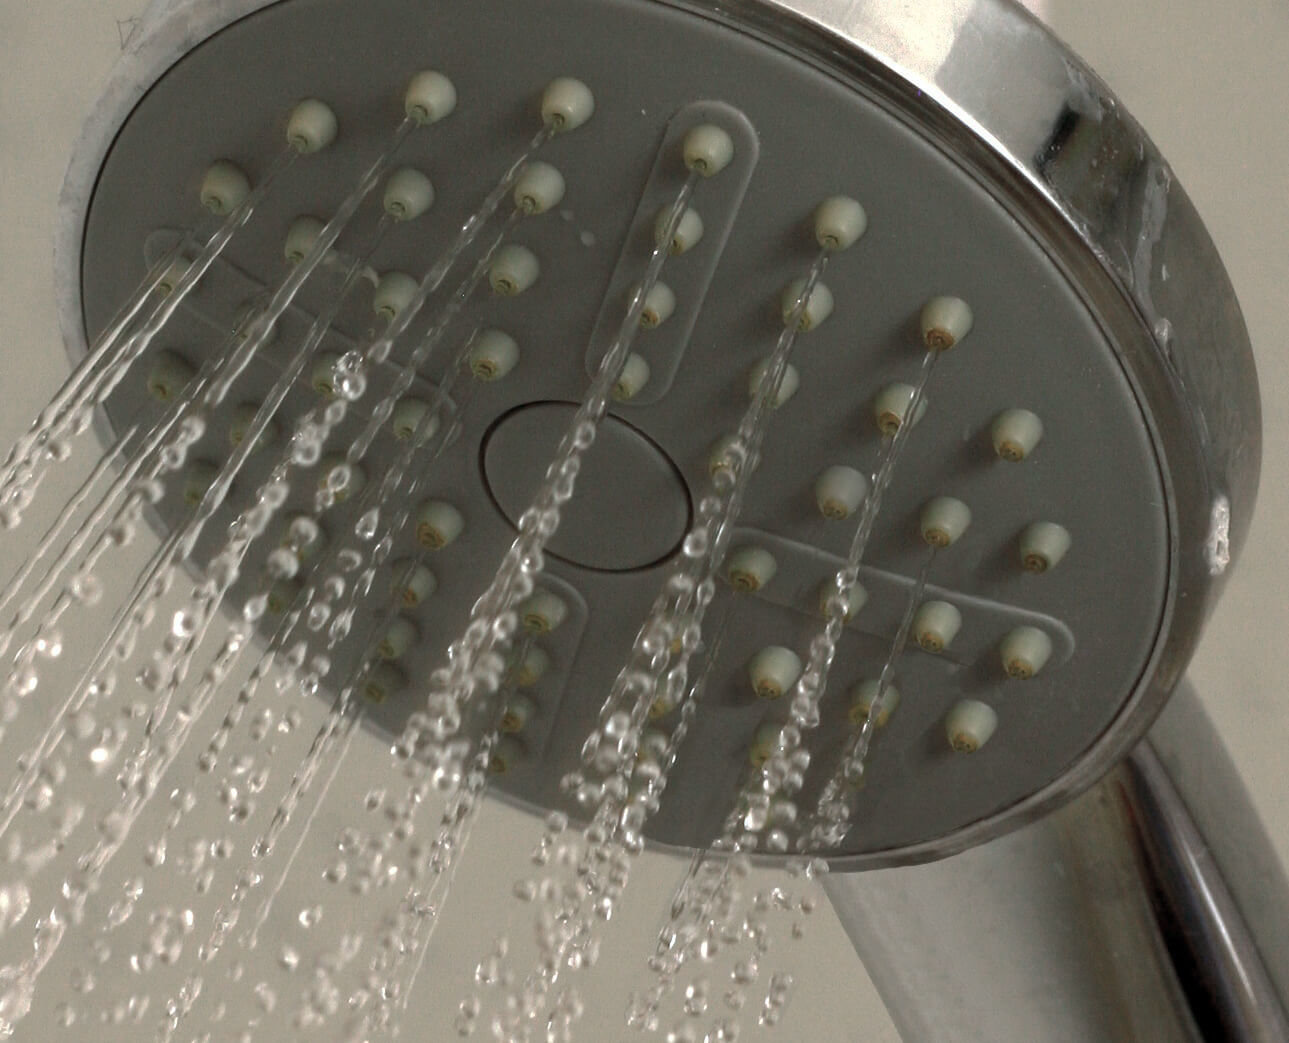 How to Clean a Shower Head: The 2 Best Methods to Get the Job Done